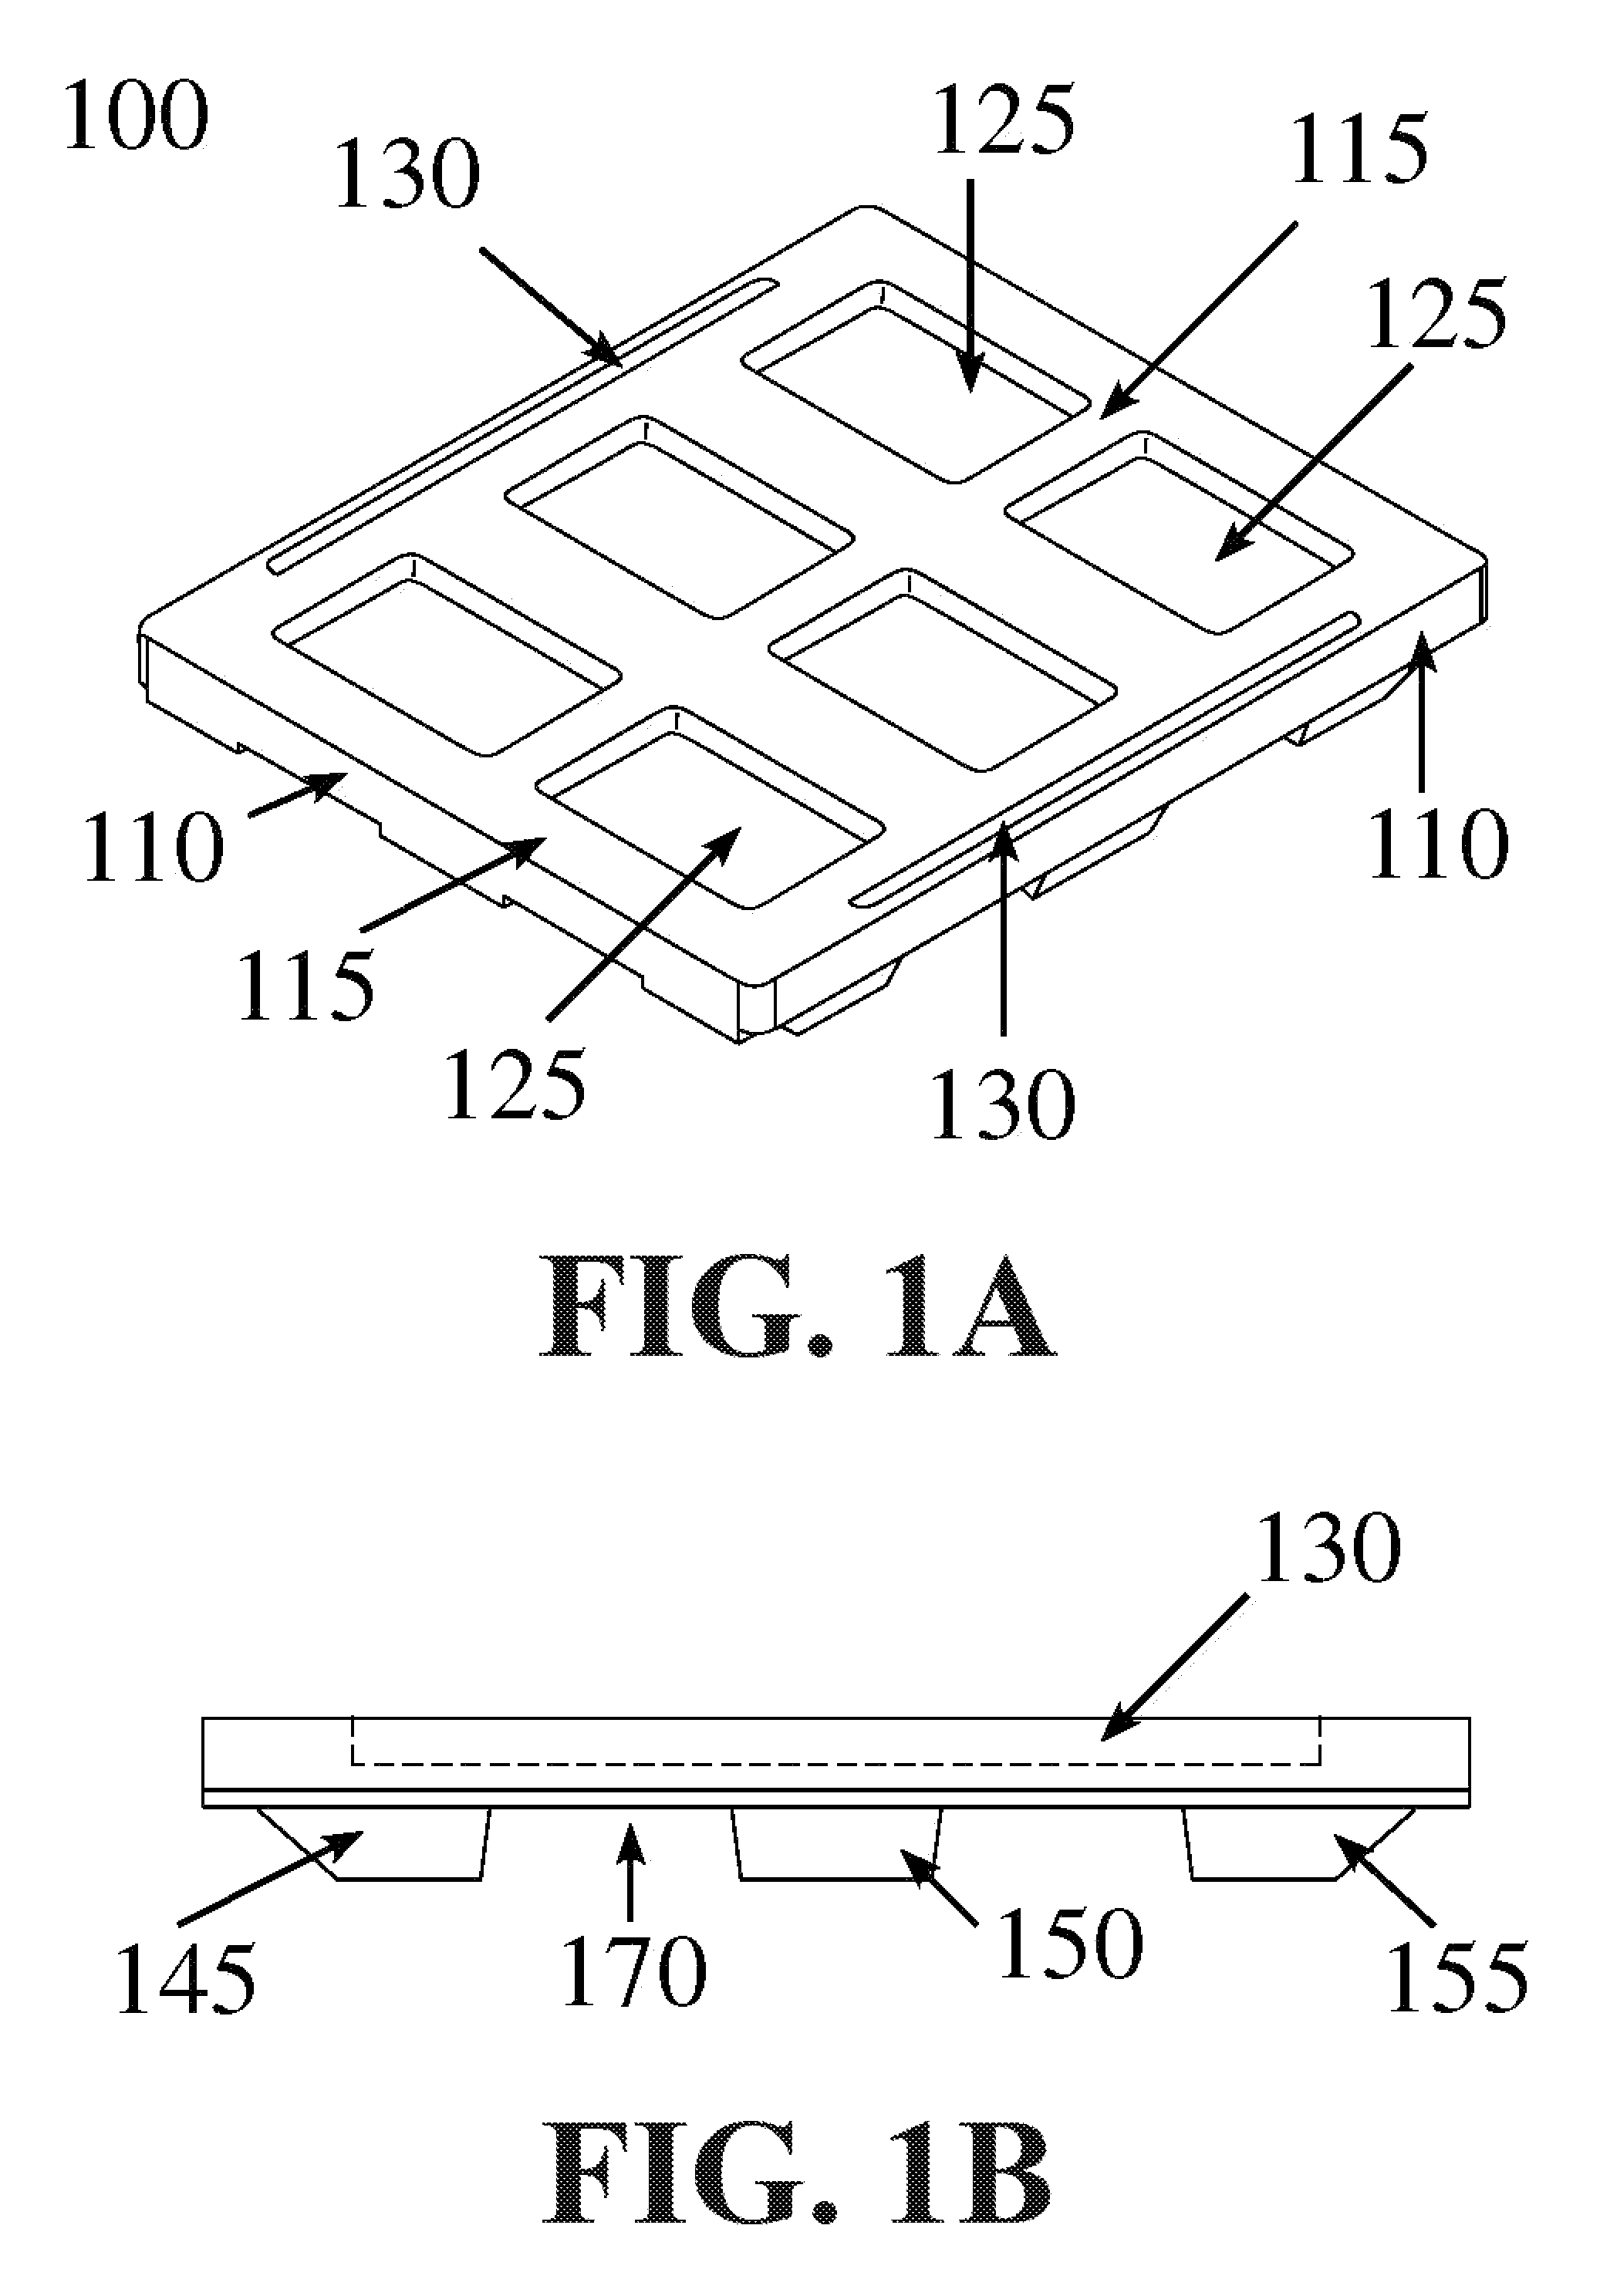 Climate control cargo container for storing,transporting and preserving cargo